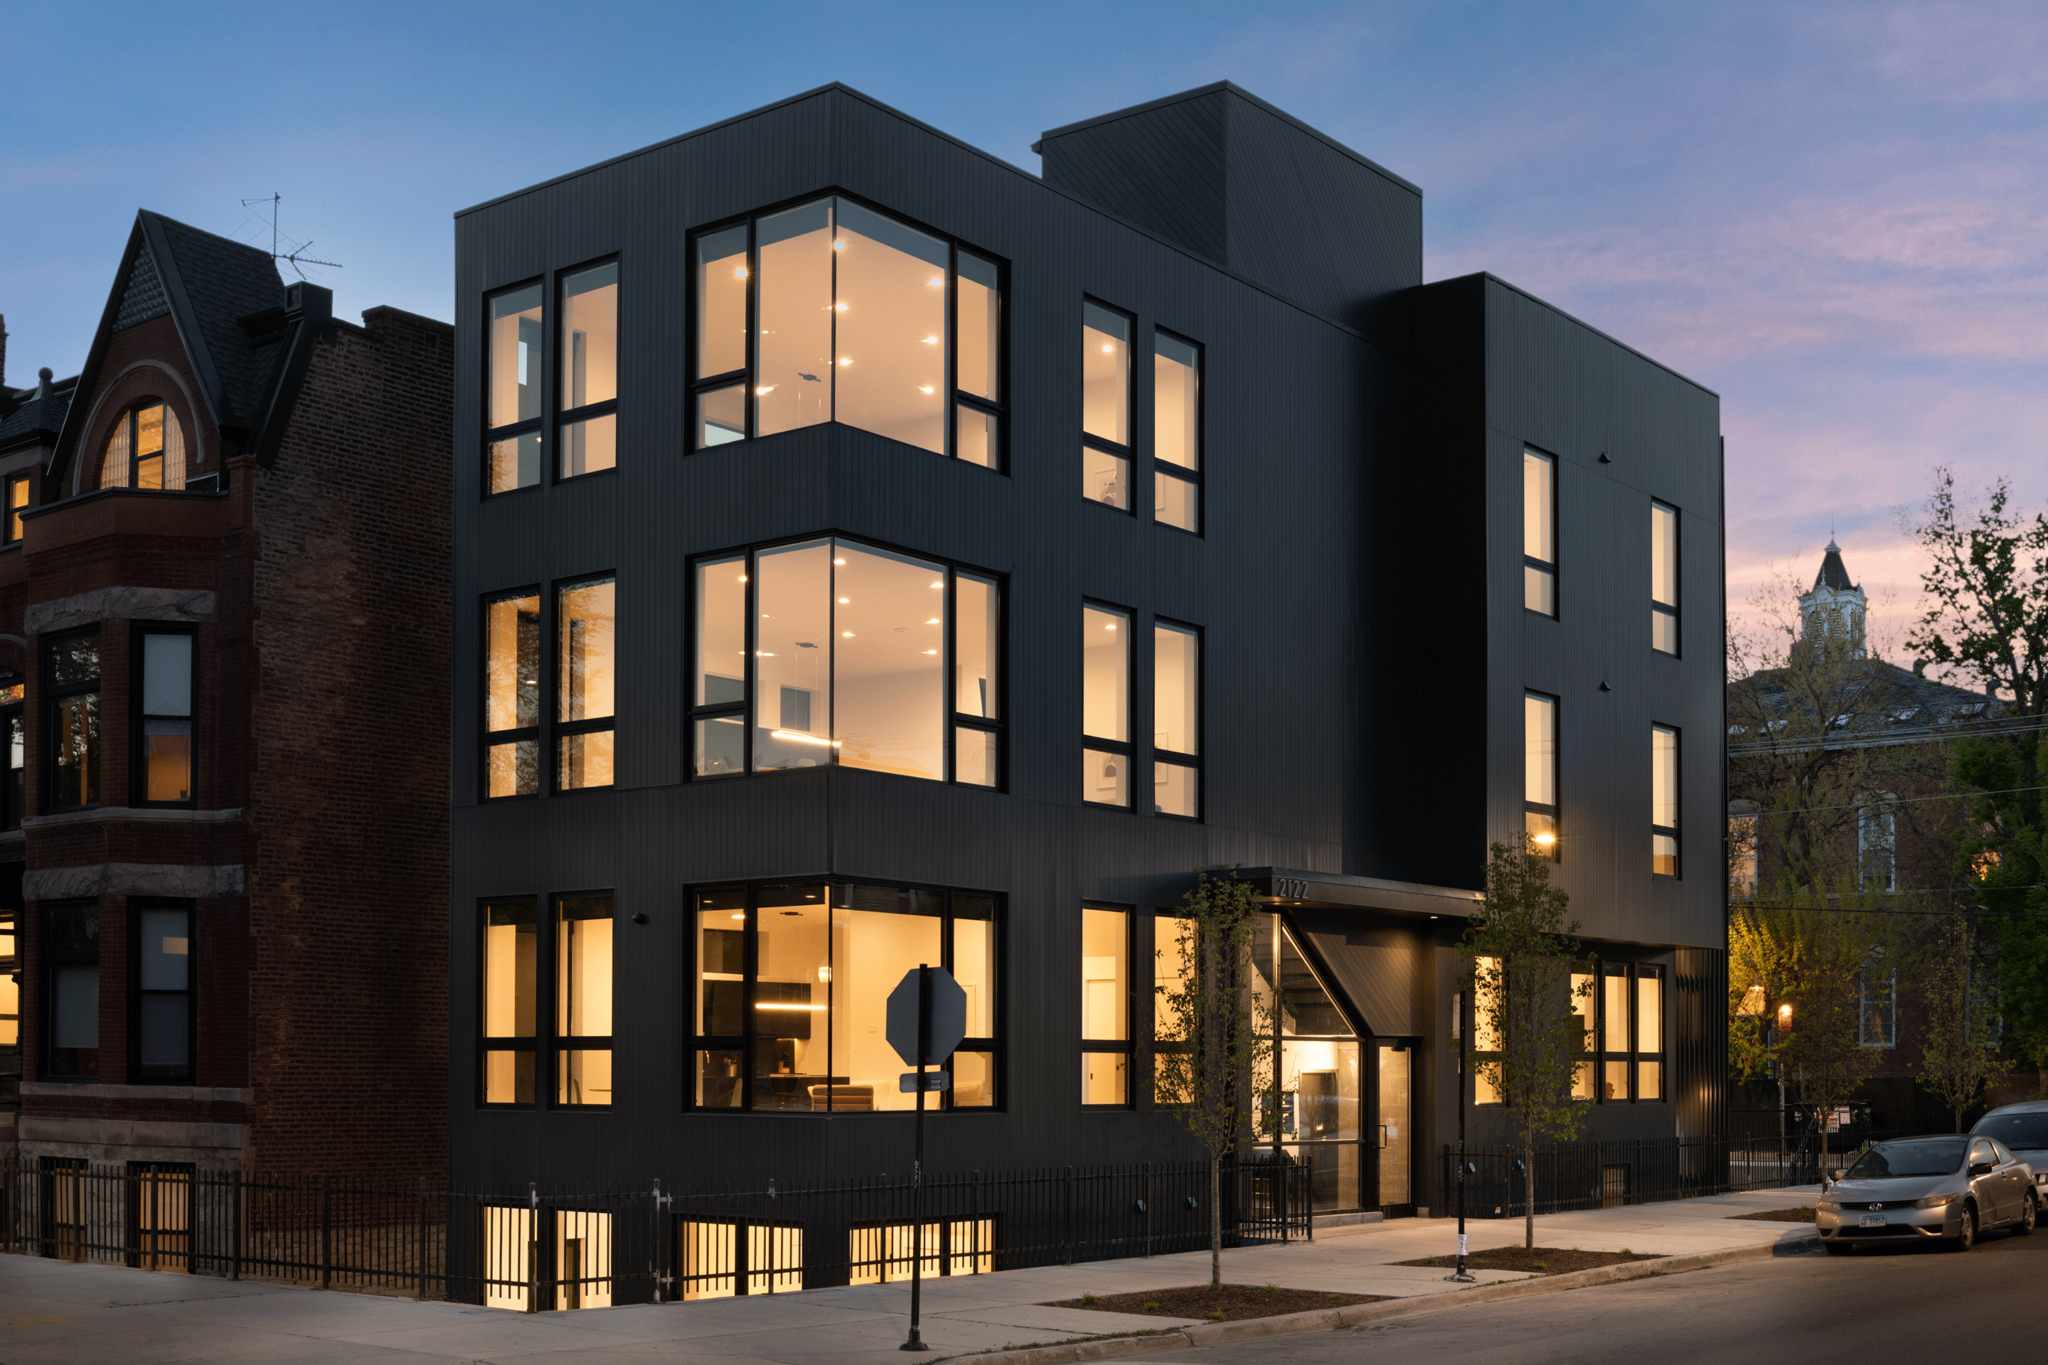 <span style="font-weight:bold"><p style="font-size:20px">Pilsen Coliving</p></span>Chicago, Illinois